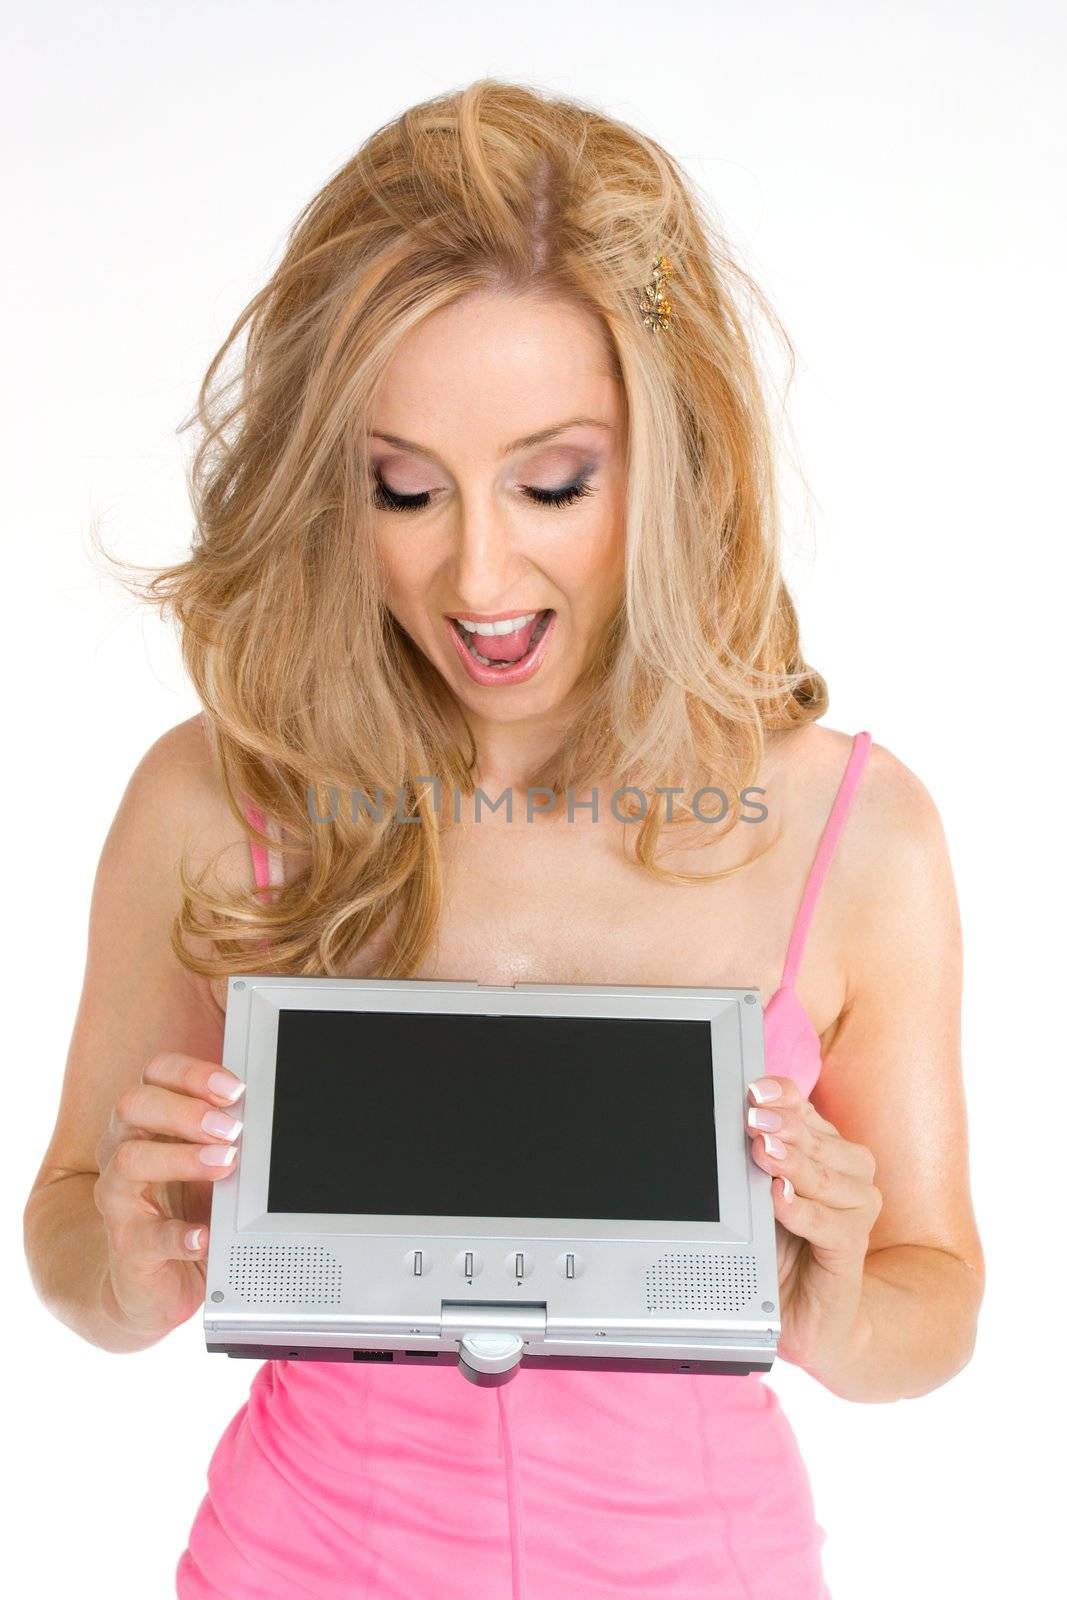 Excited woman looks at a portable electronic lcd screen